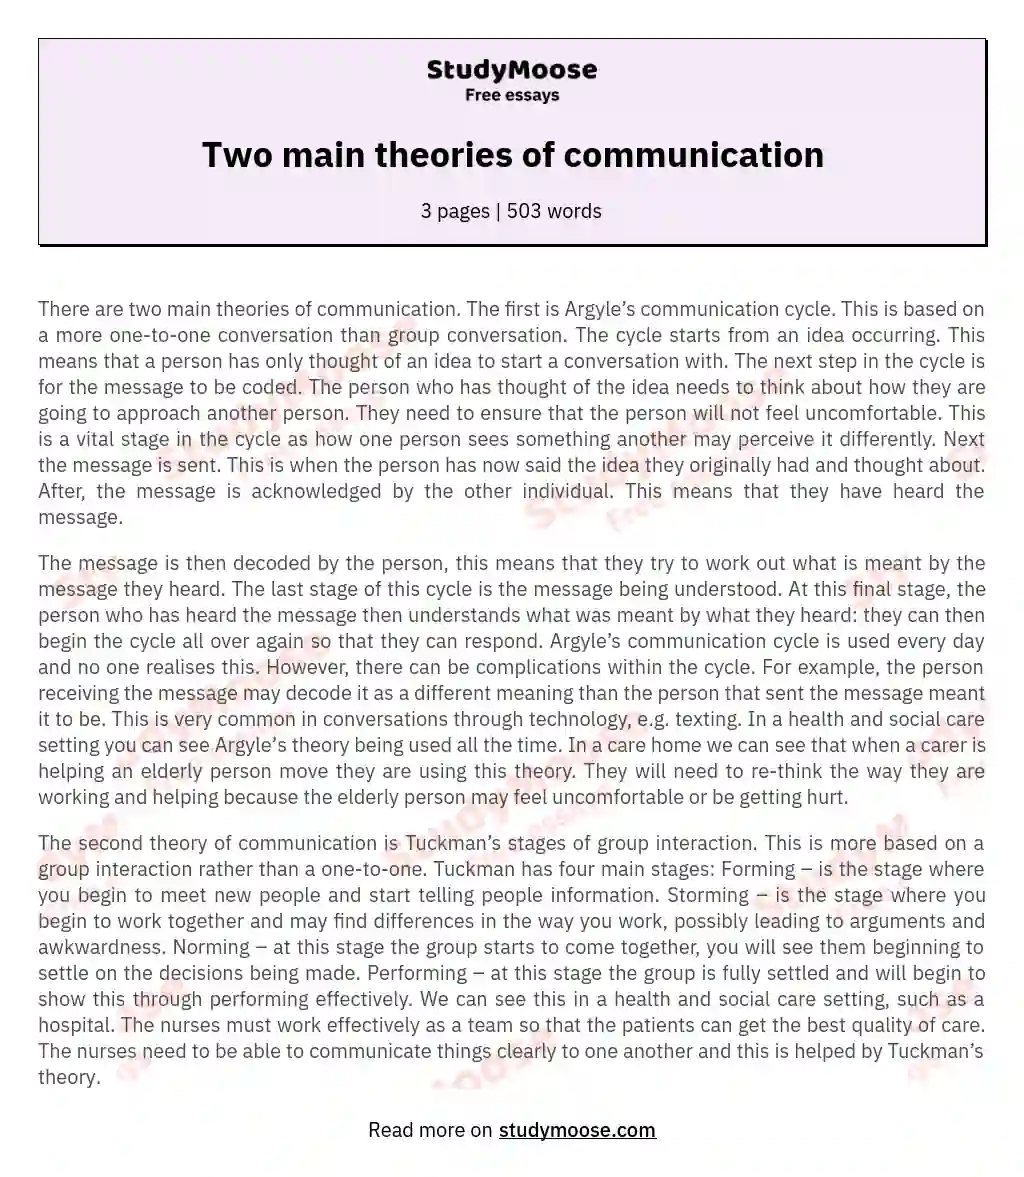 Two main theories of communication essay